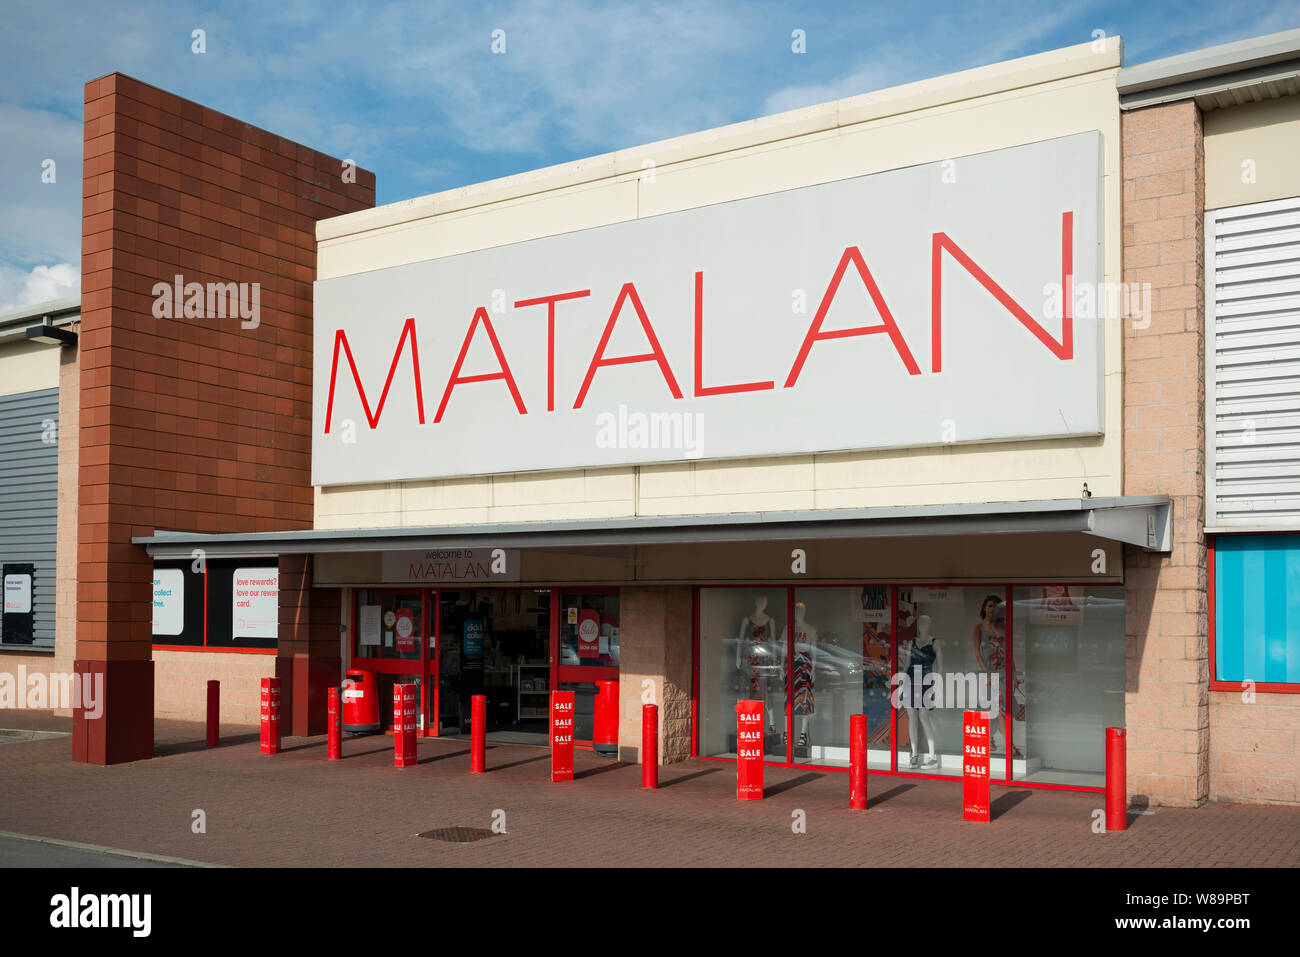 The storefront of the shoes, clothing and fashion retailer Matalan on a  retail park in Baguley, Manchester. (Editorial use only Stock Photo - Alamy